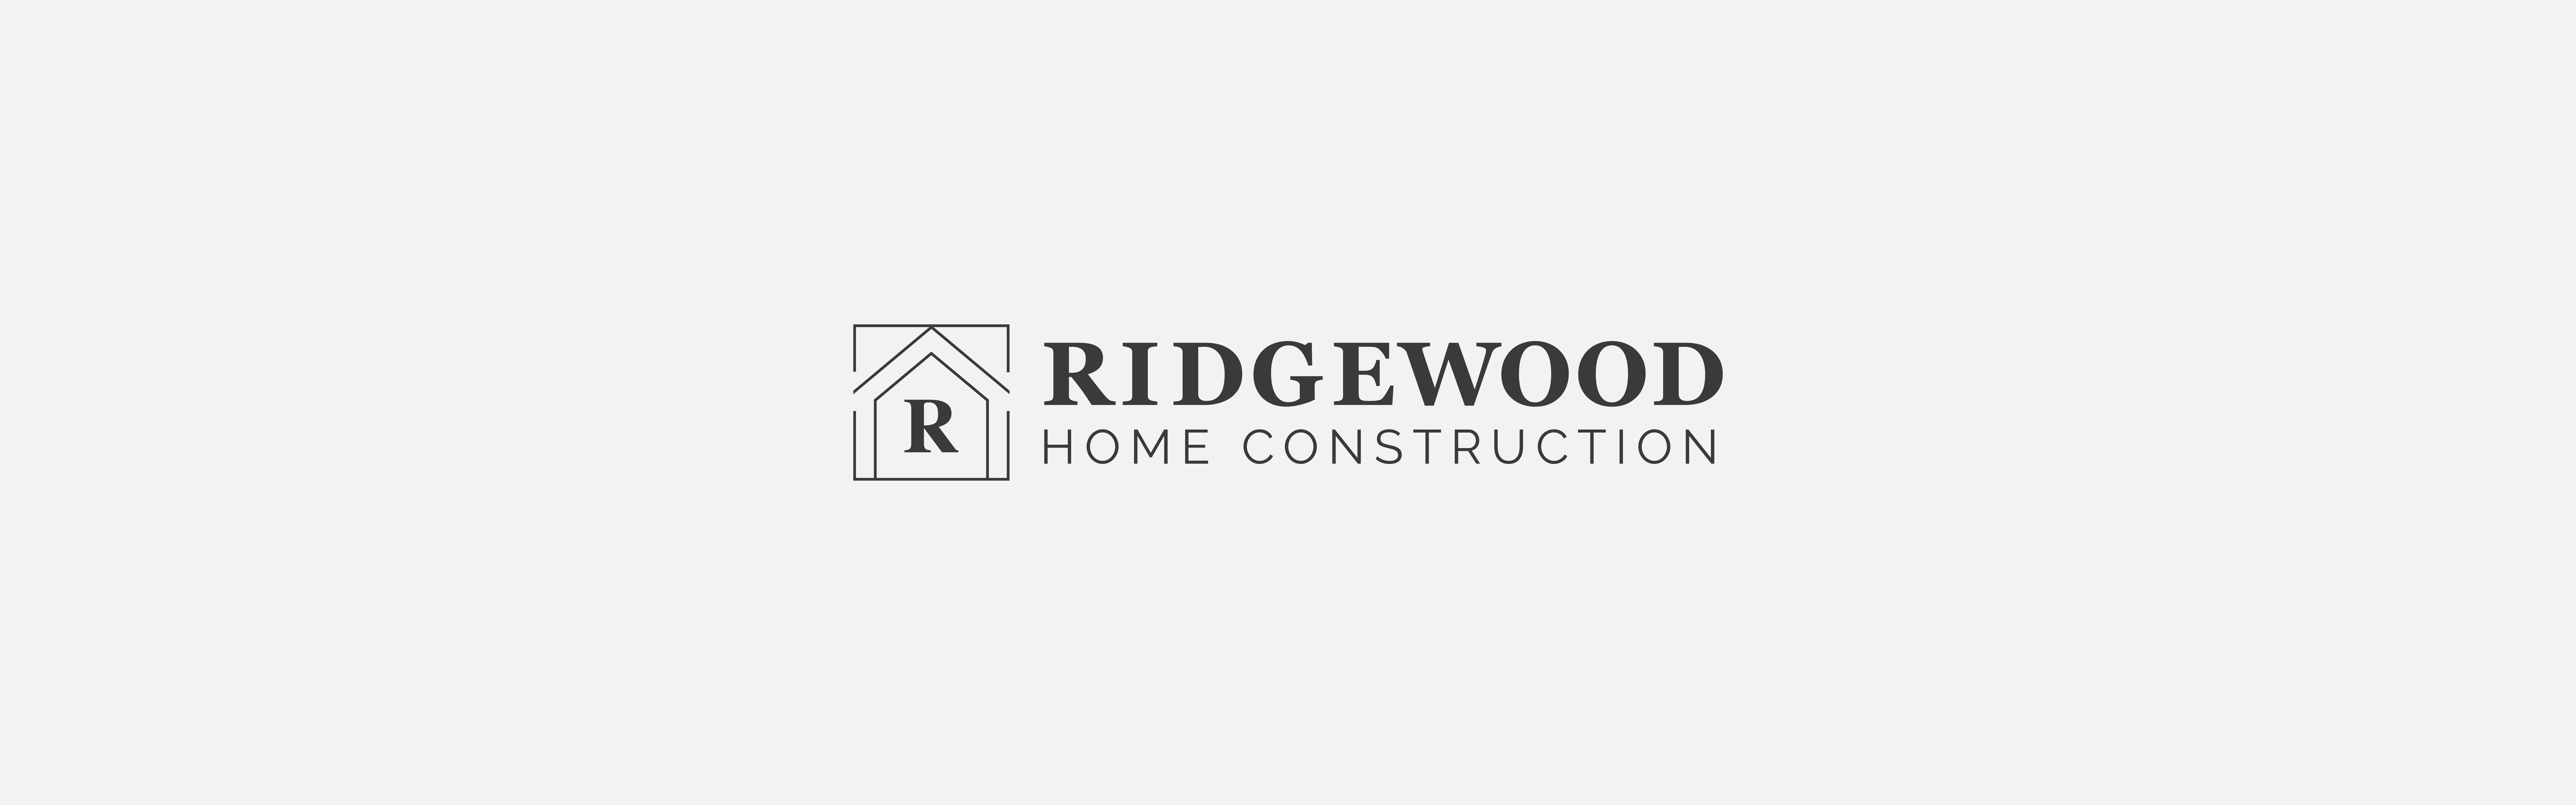 Logo of Ridgewood Home Construction featuring a stylized 'R' within a house outline above the company name in capitalized font.